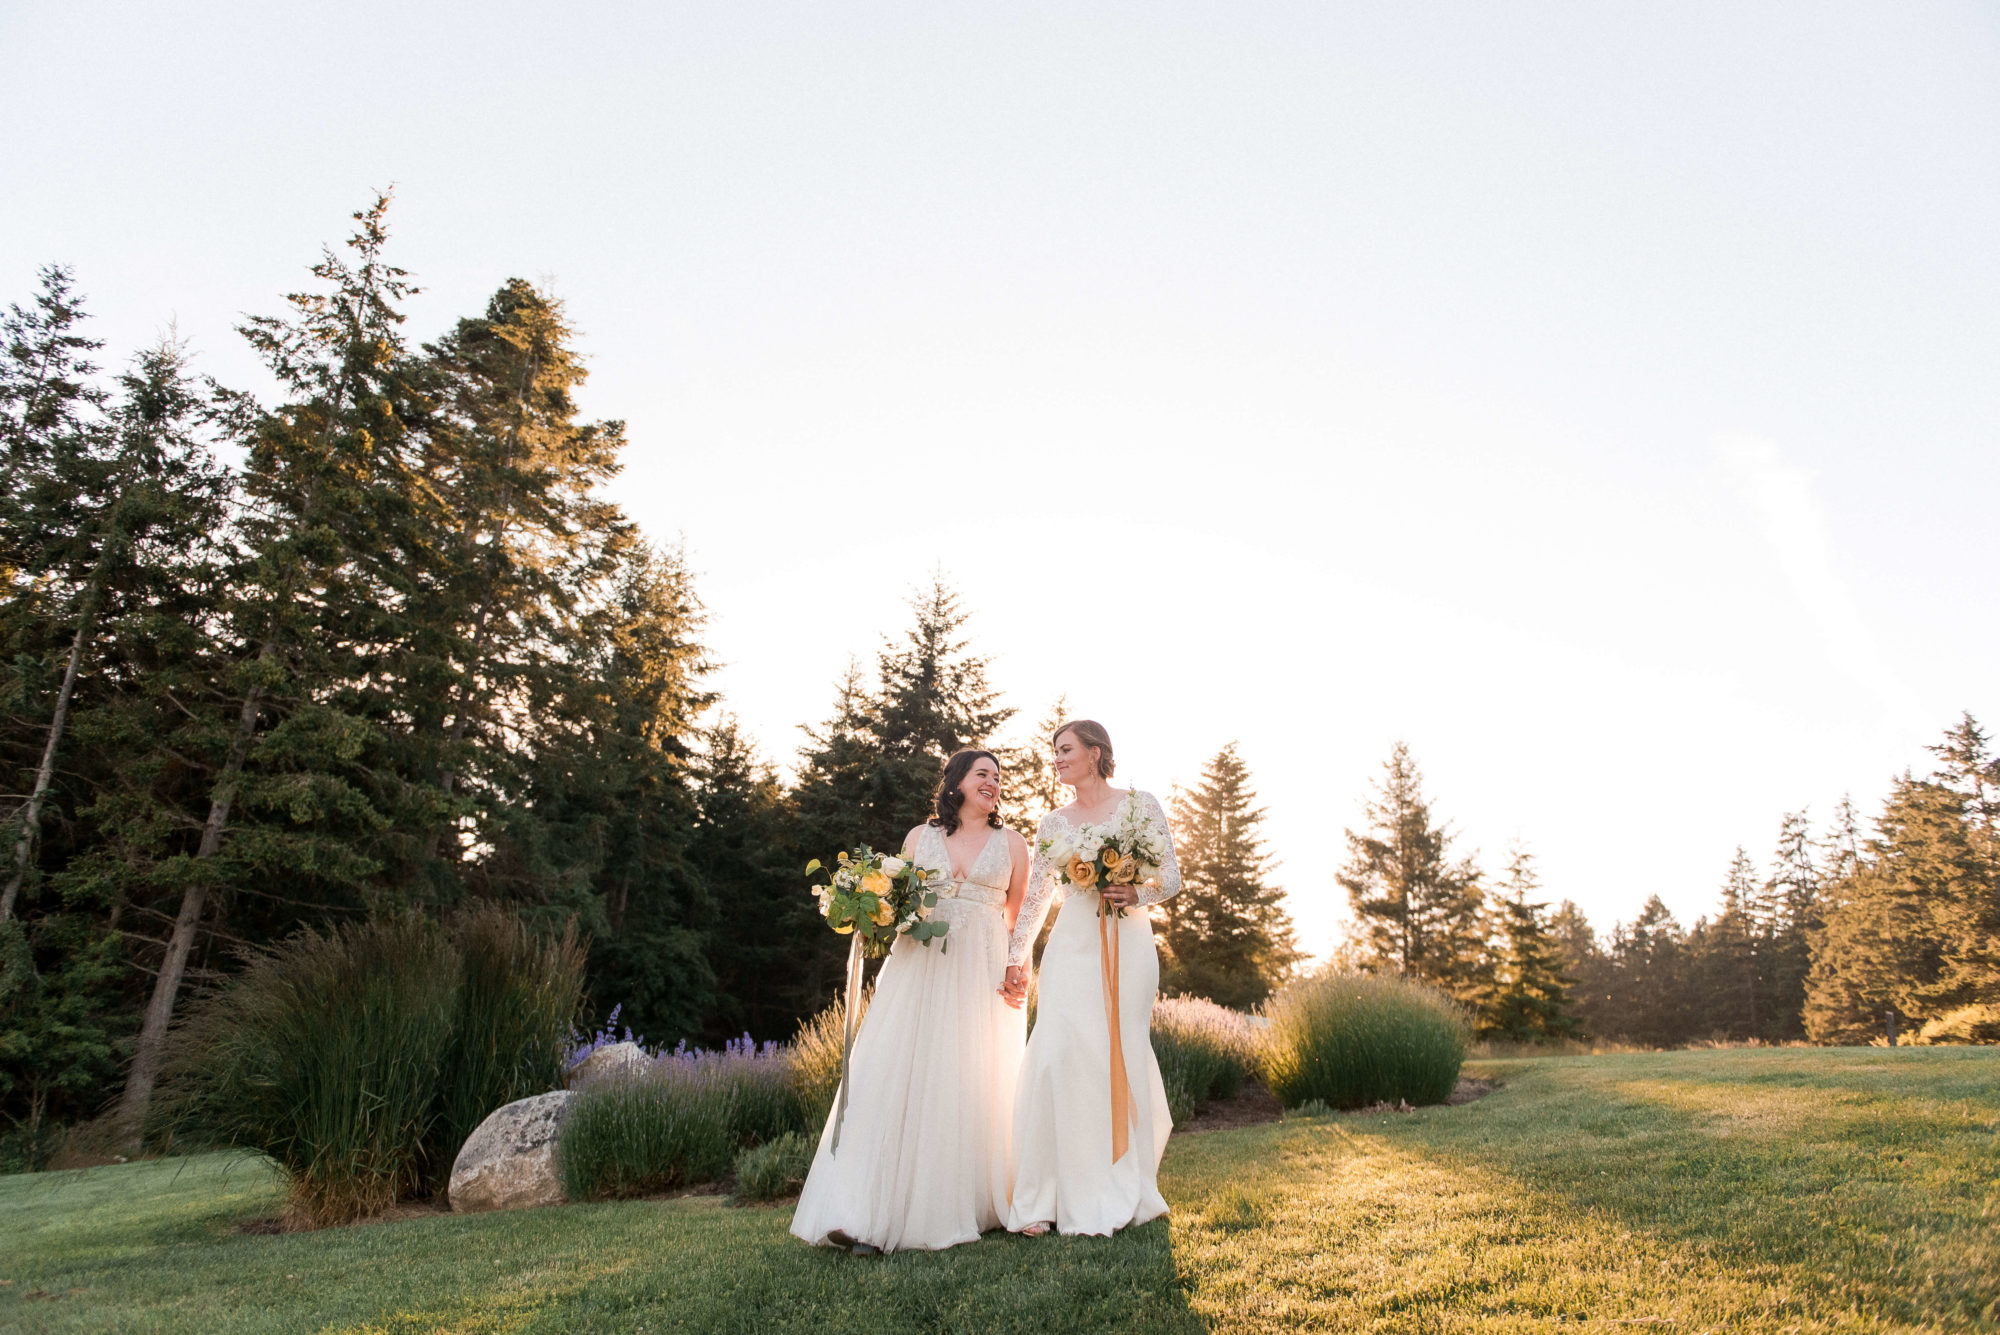 lgbtq couple holding hands in a field at sunset after their Saltwater Farm Wedding